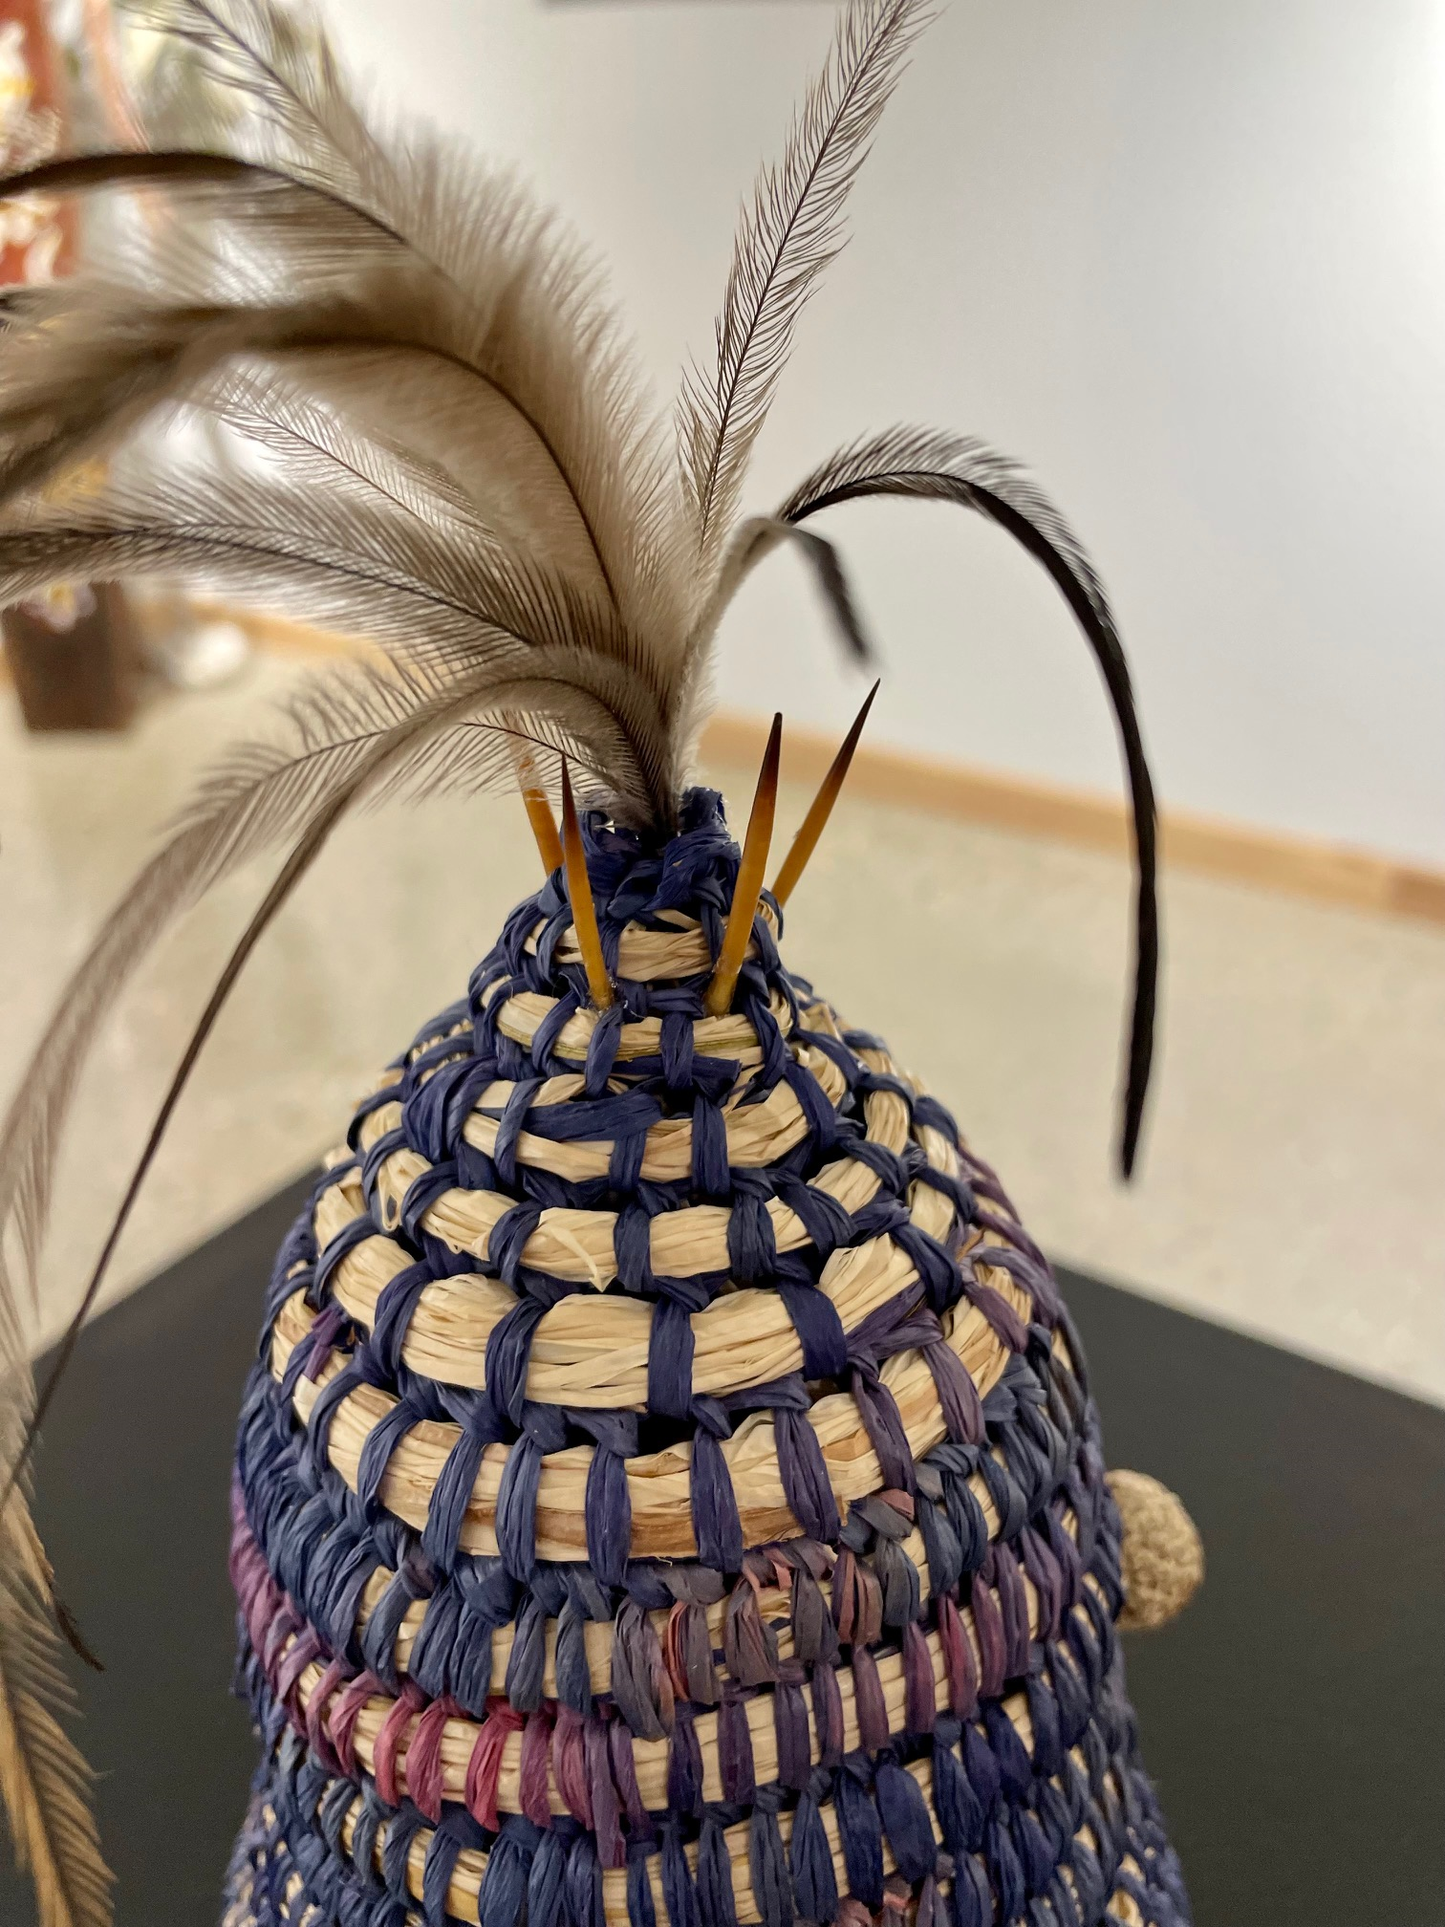 Woven Vase with Emu Feathers, Echidna Quills and Quandong - Trish Cerminara (Gamilaroi)